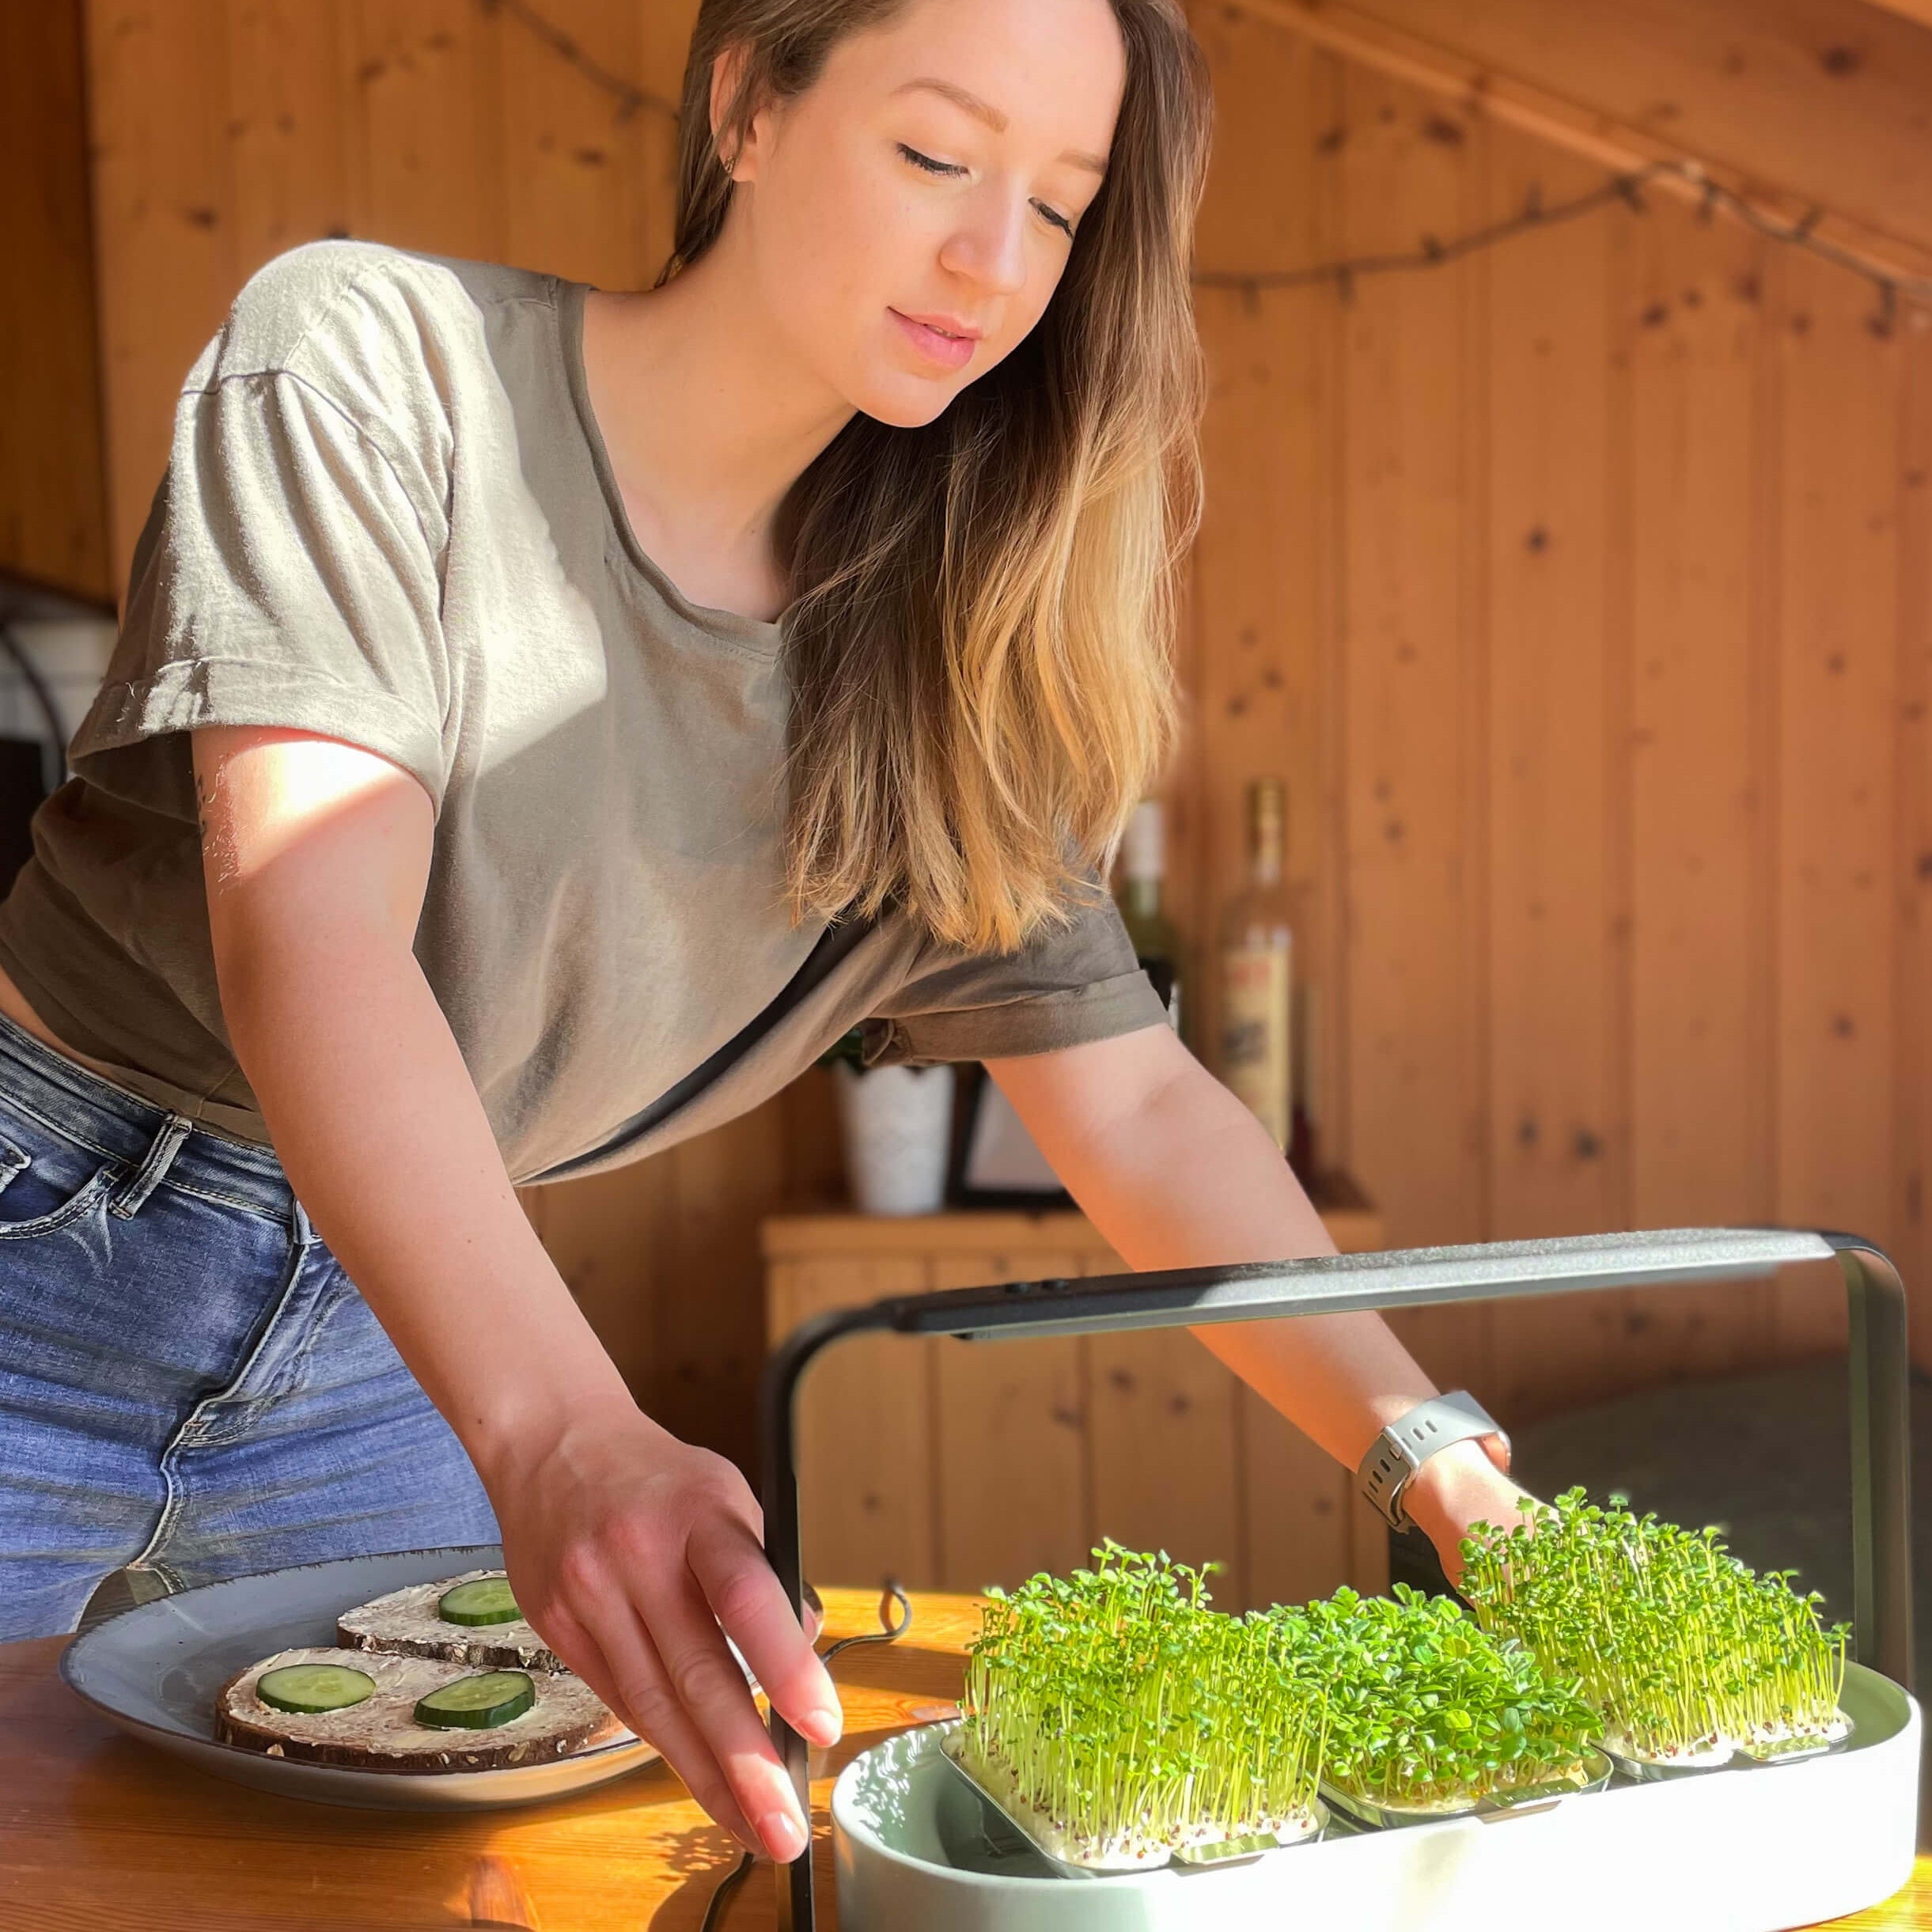 Young woman placing her ingarden on a table and preparing a healthy breakfast toast with microgreens.